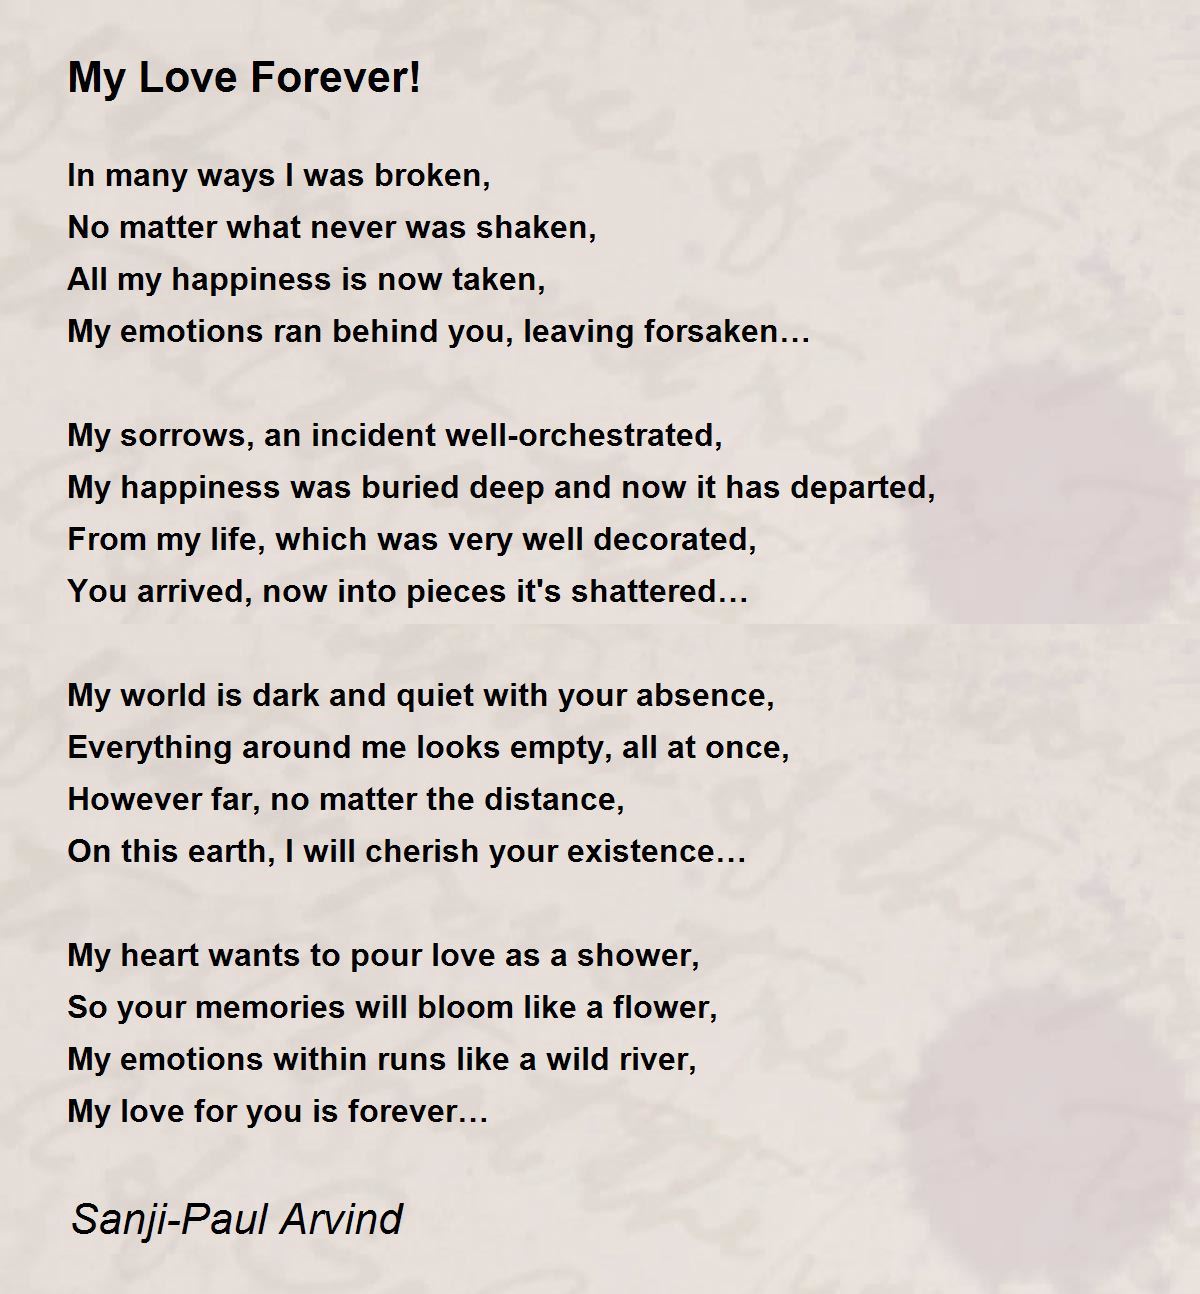 Cherish Your Love, Now and Forever!